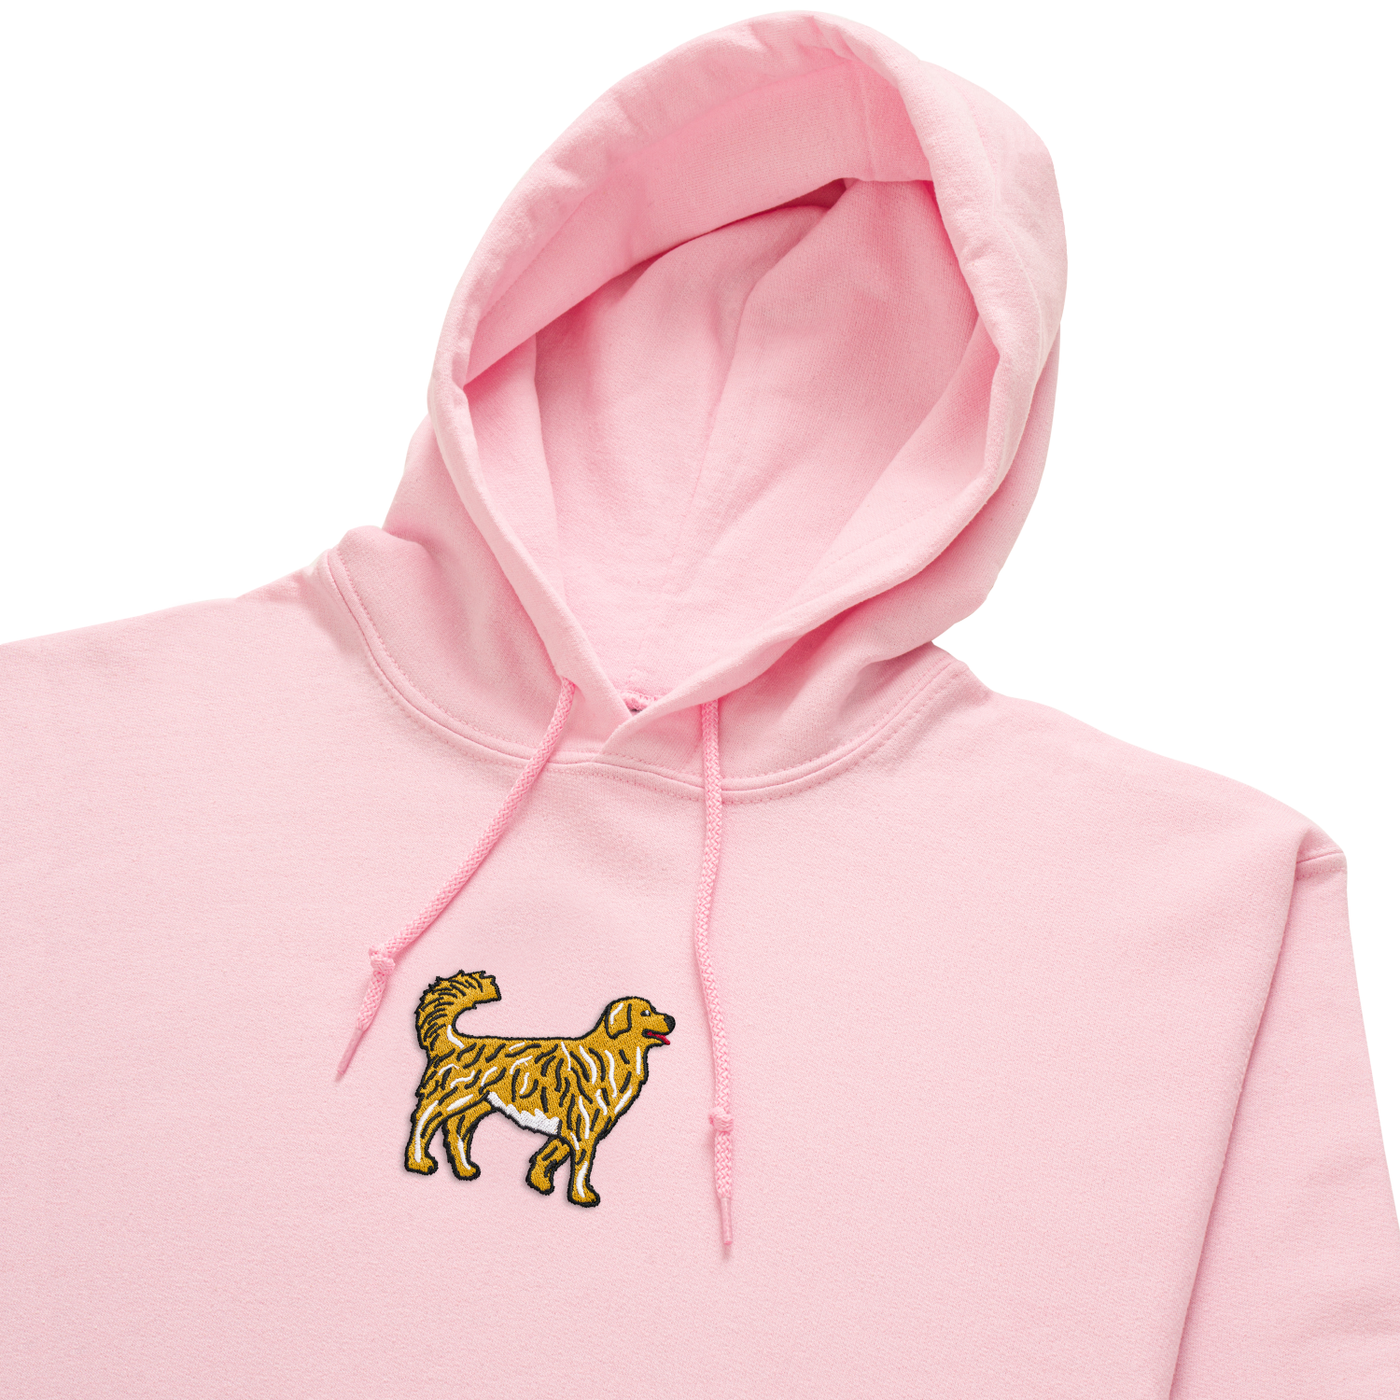 Bobby's Planet Women's Embroidered Golden Retriever Hoodie from Paws Dog Cat Animals Collection in Light Pink Color#color_light-pink